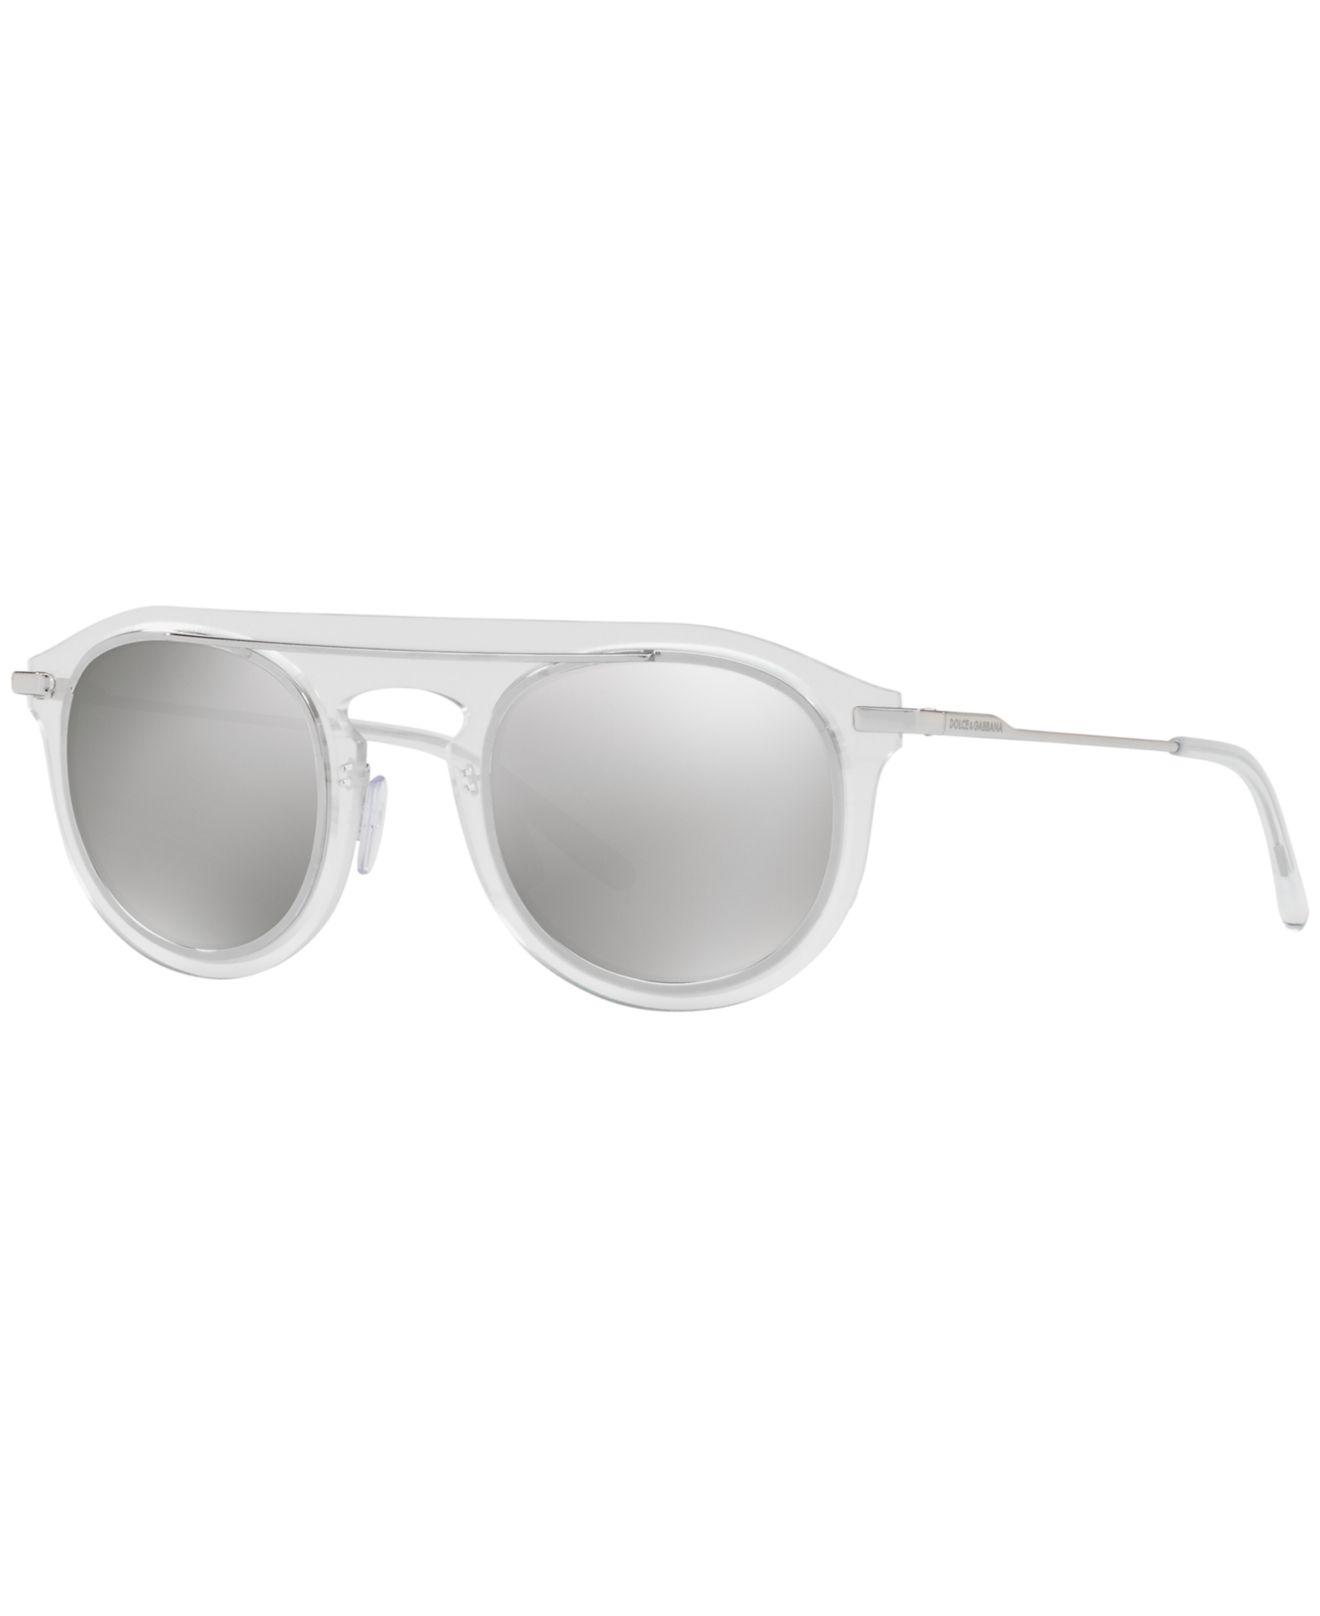 Dolce & Gabbana 2169 Round Sunglasses in White for Men - Save 30% - Lyst